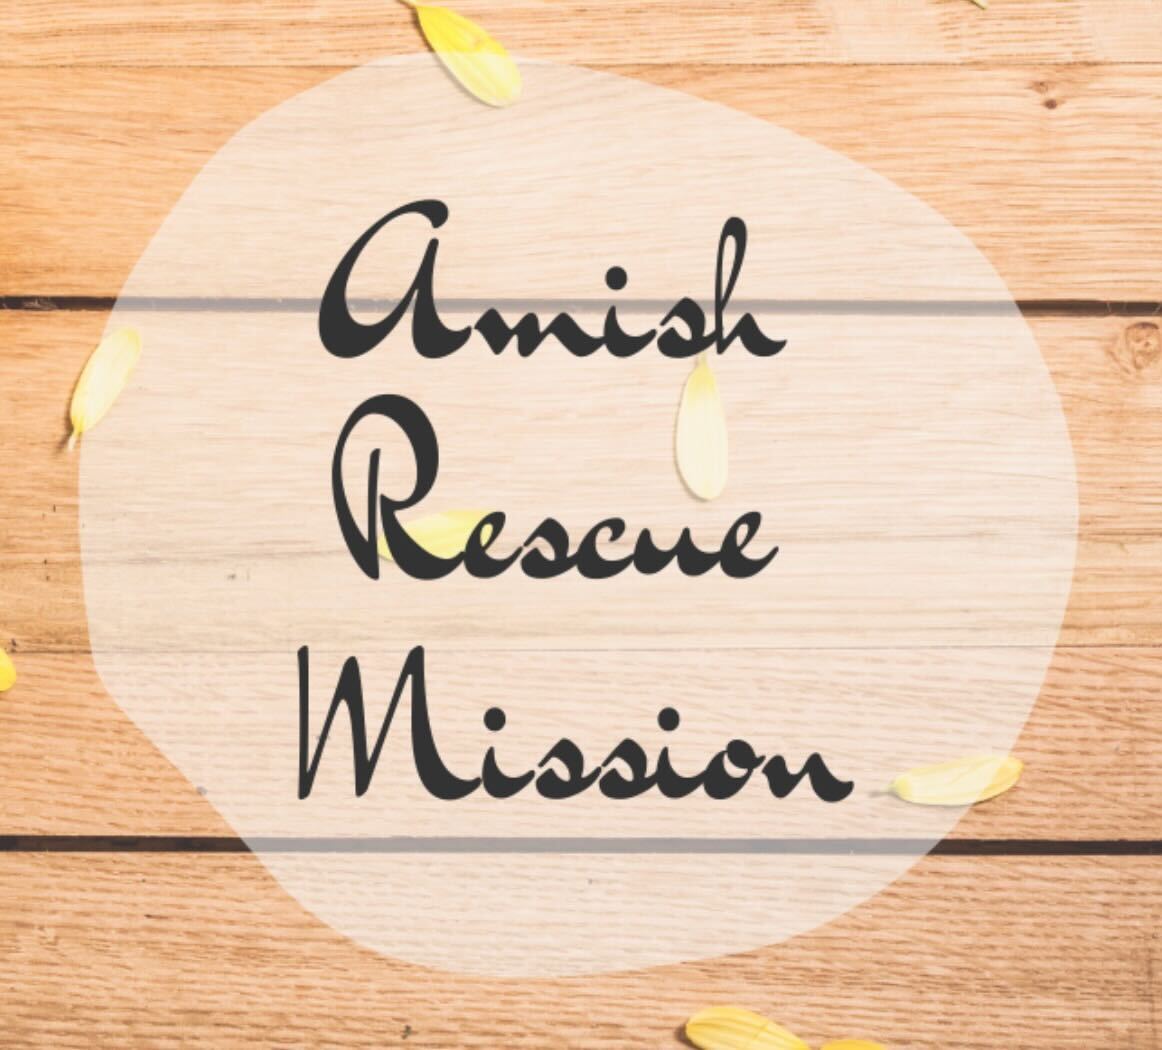 Amish Rescue Mission